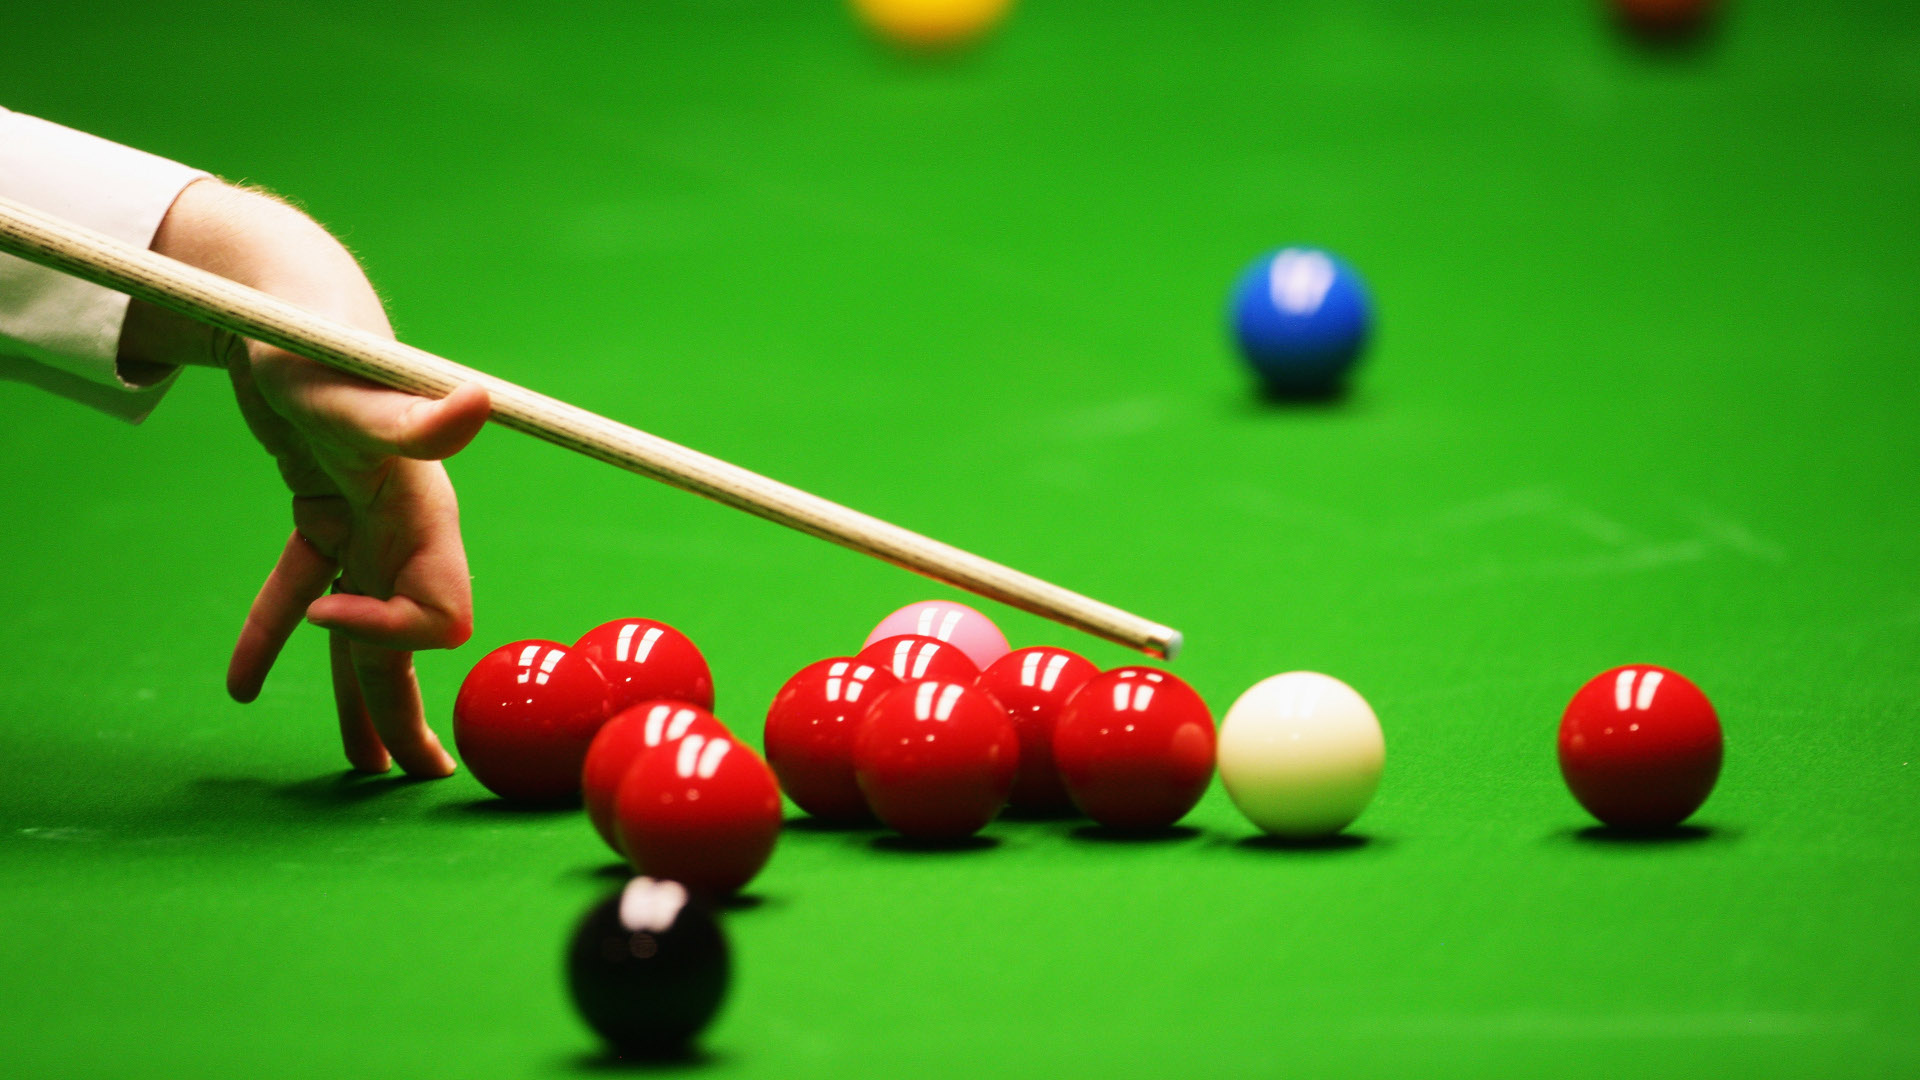 Snooker: World Seniors Championship 2022, Competitive and recreational cue sports. 1920x1080 Full HD Wallpaper.